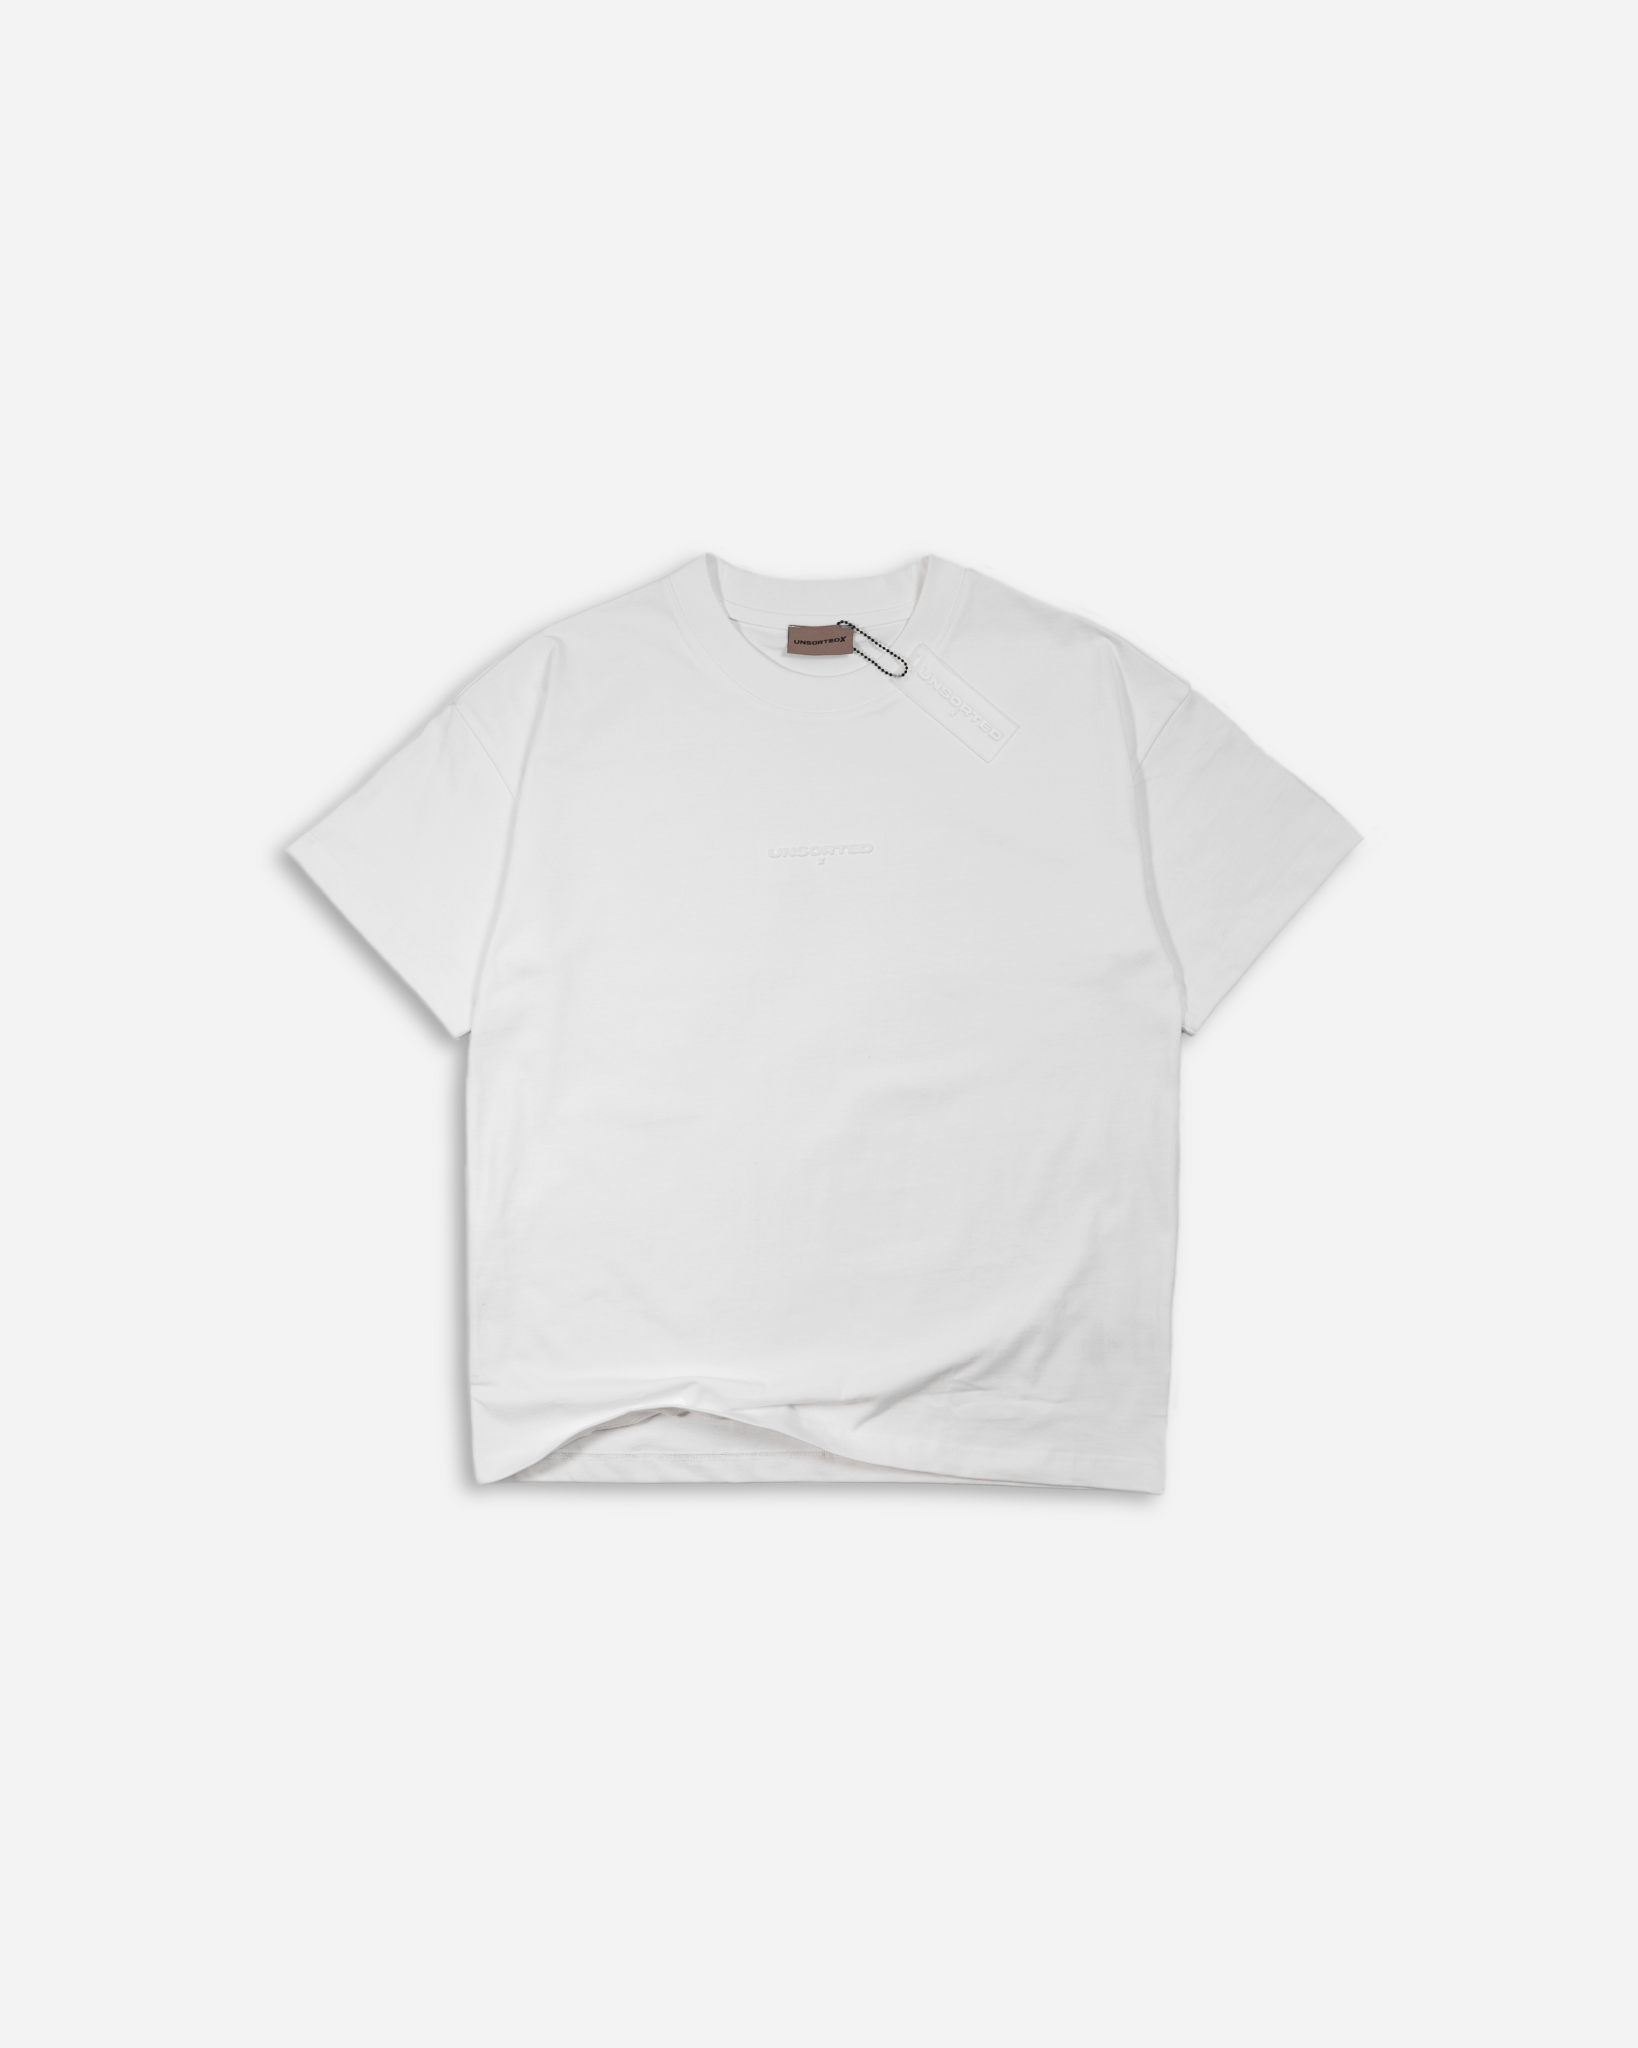 EMBOSSED LOGO T-SHIRT - Unsorted x